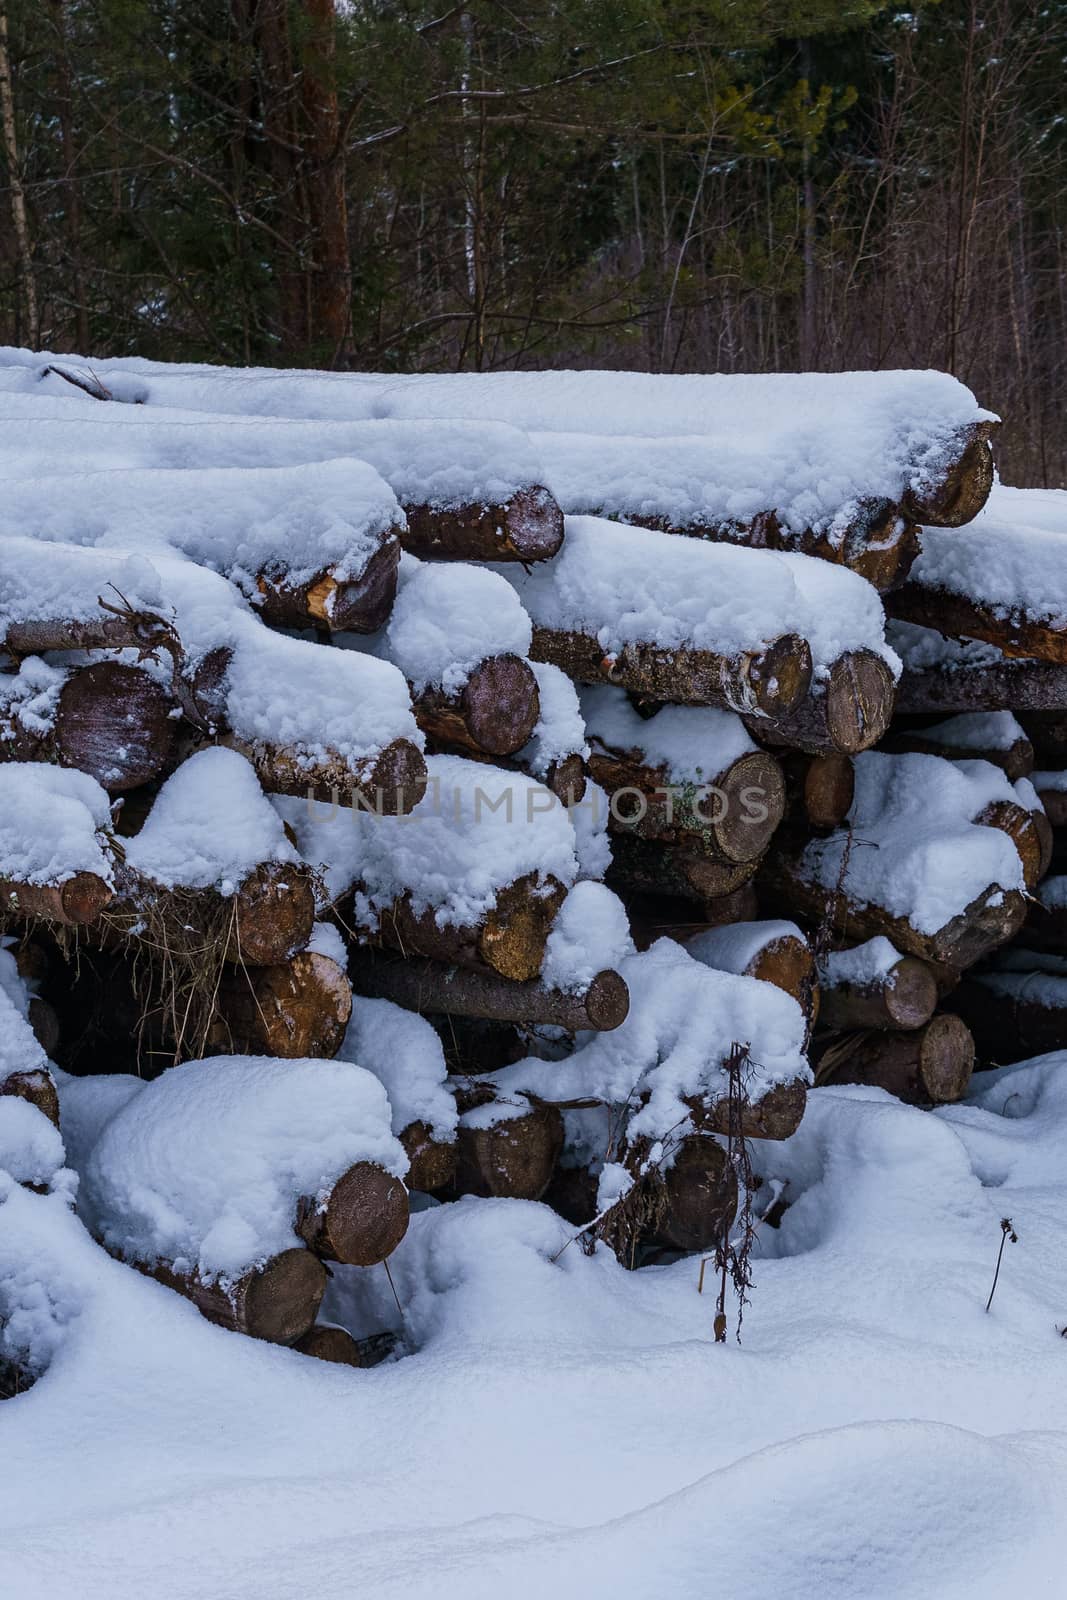 Logs in a pile covered with snow, partially rotted on a winter day